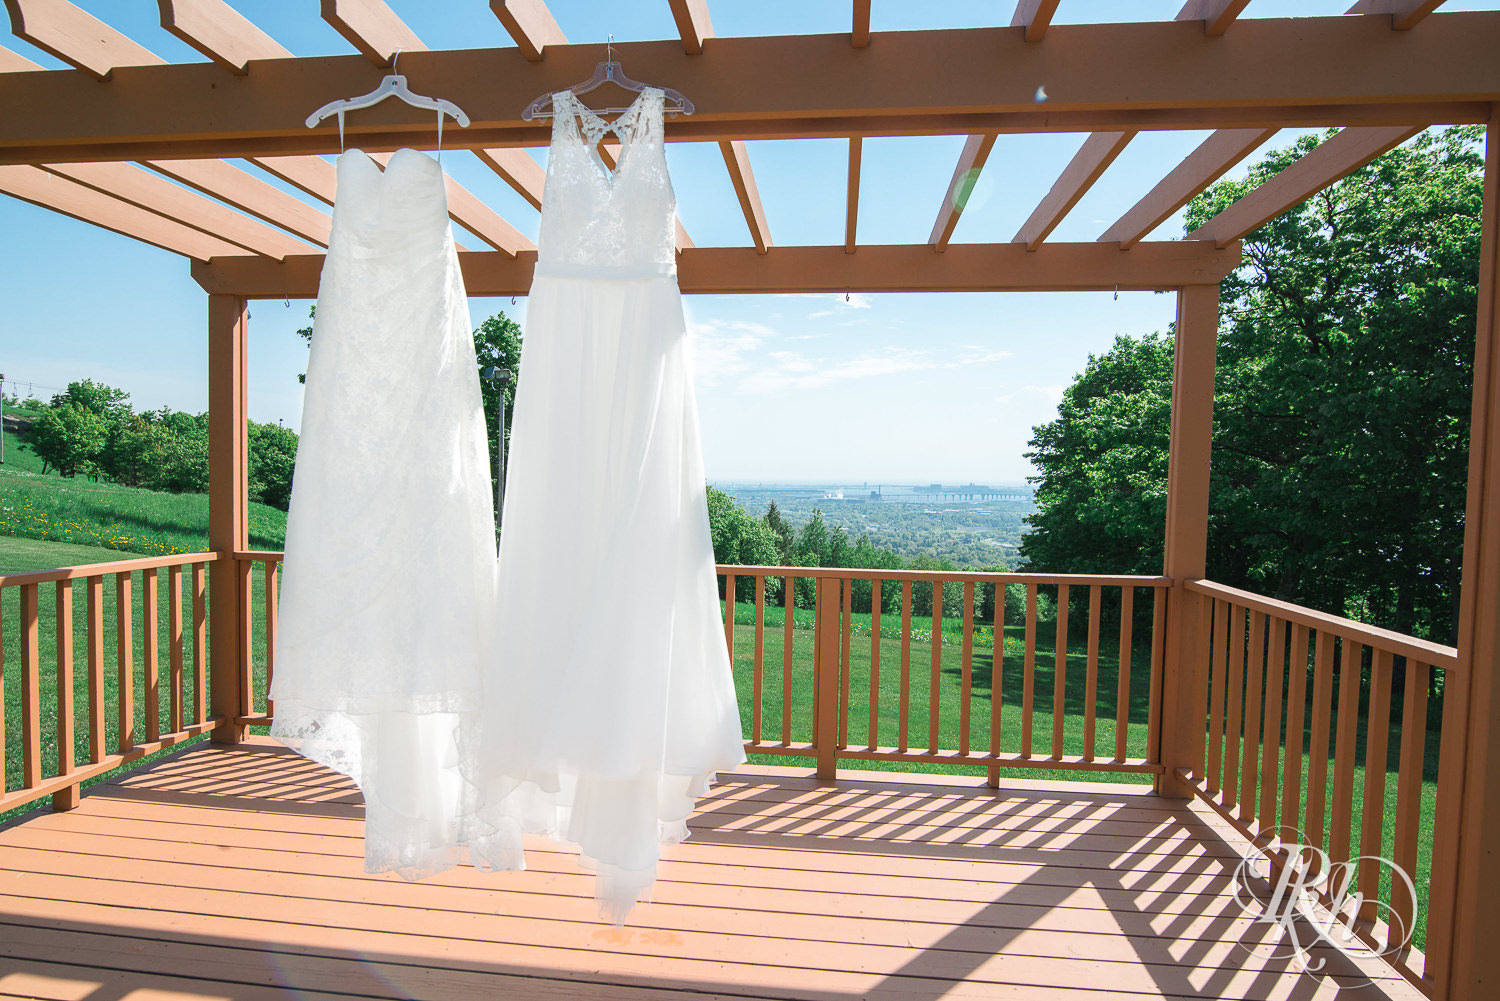 Two wedding dresses hang on alter at Spirit Mountain in Duluth, Minnesota.